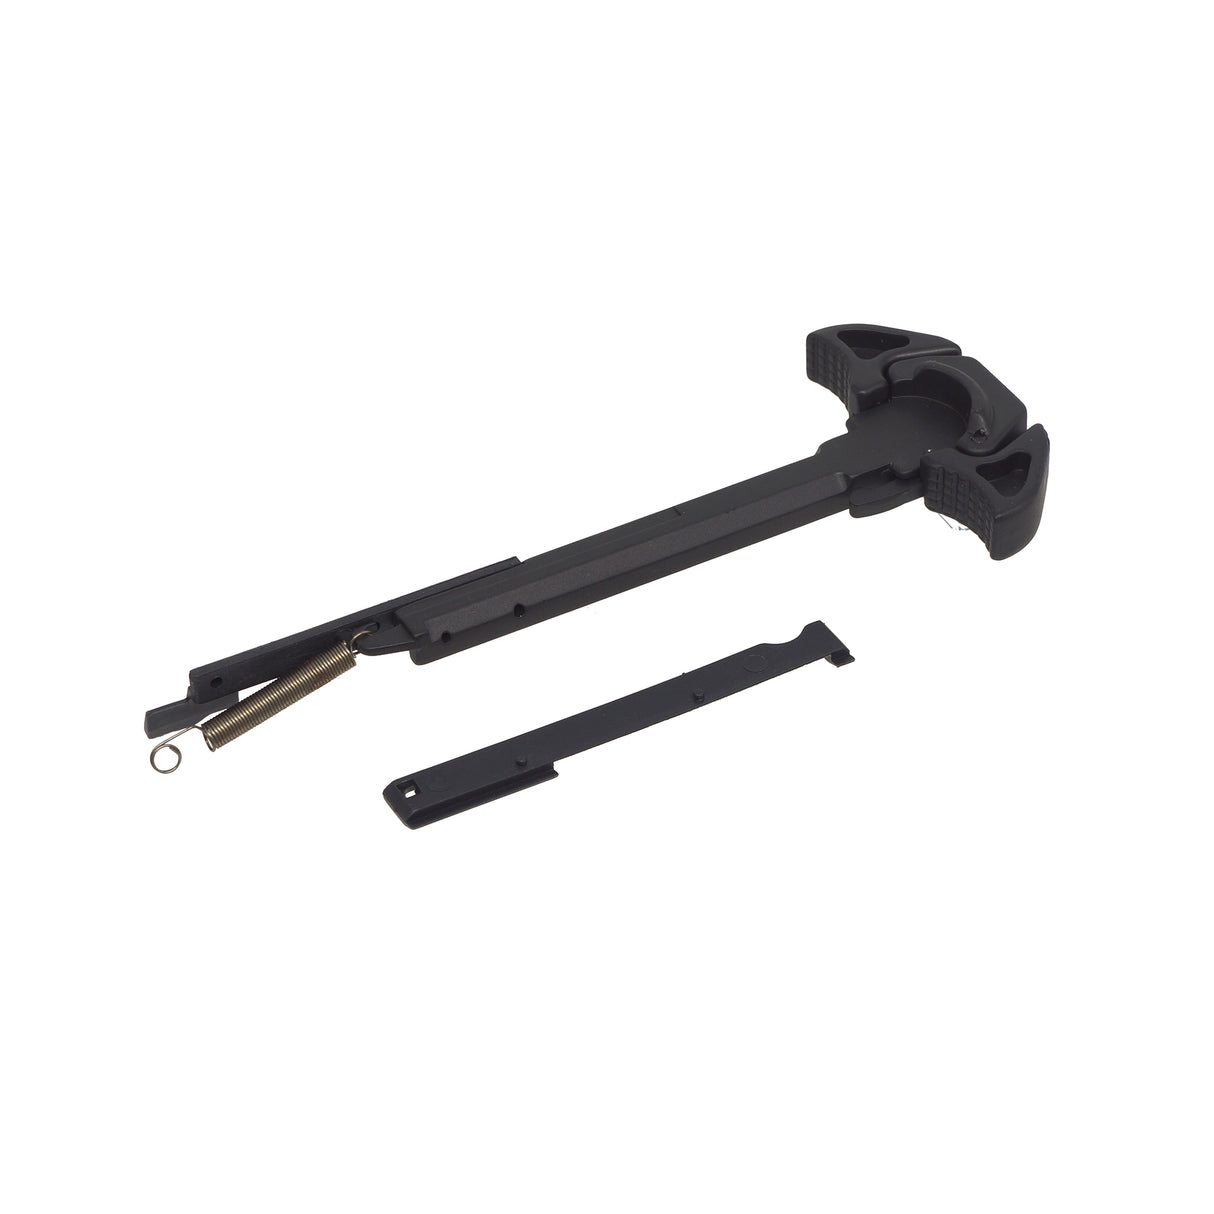 E&C MK16 G-Style Charging Handle for M4 AEG ( MP199 )